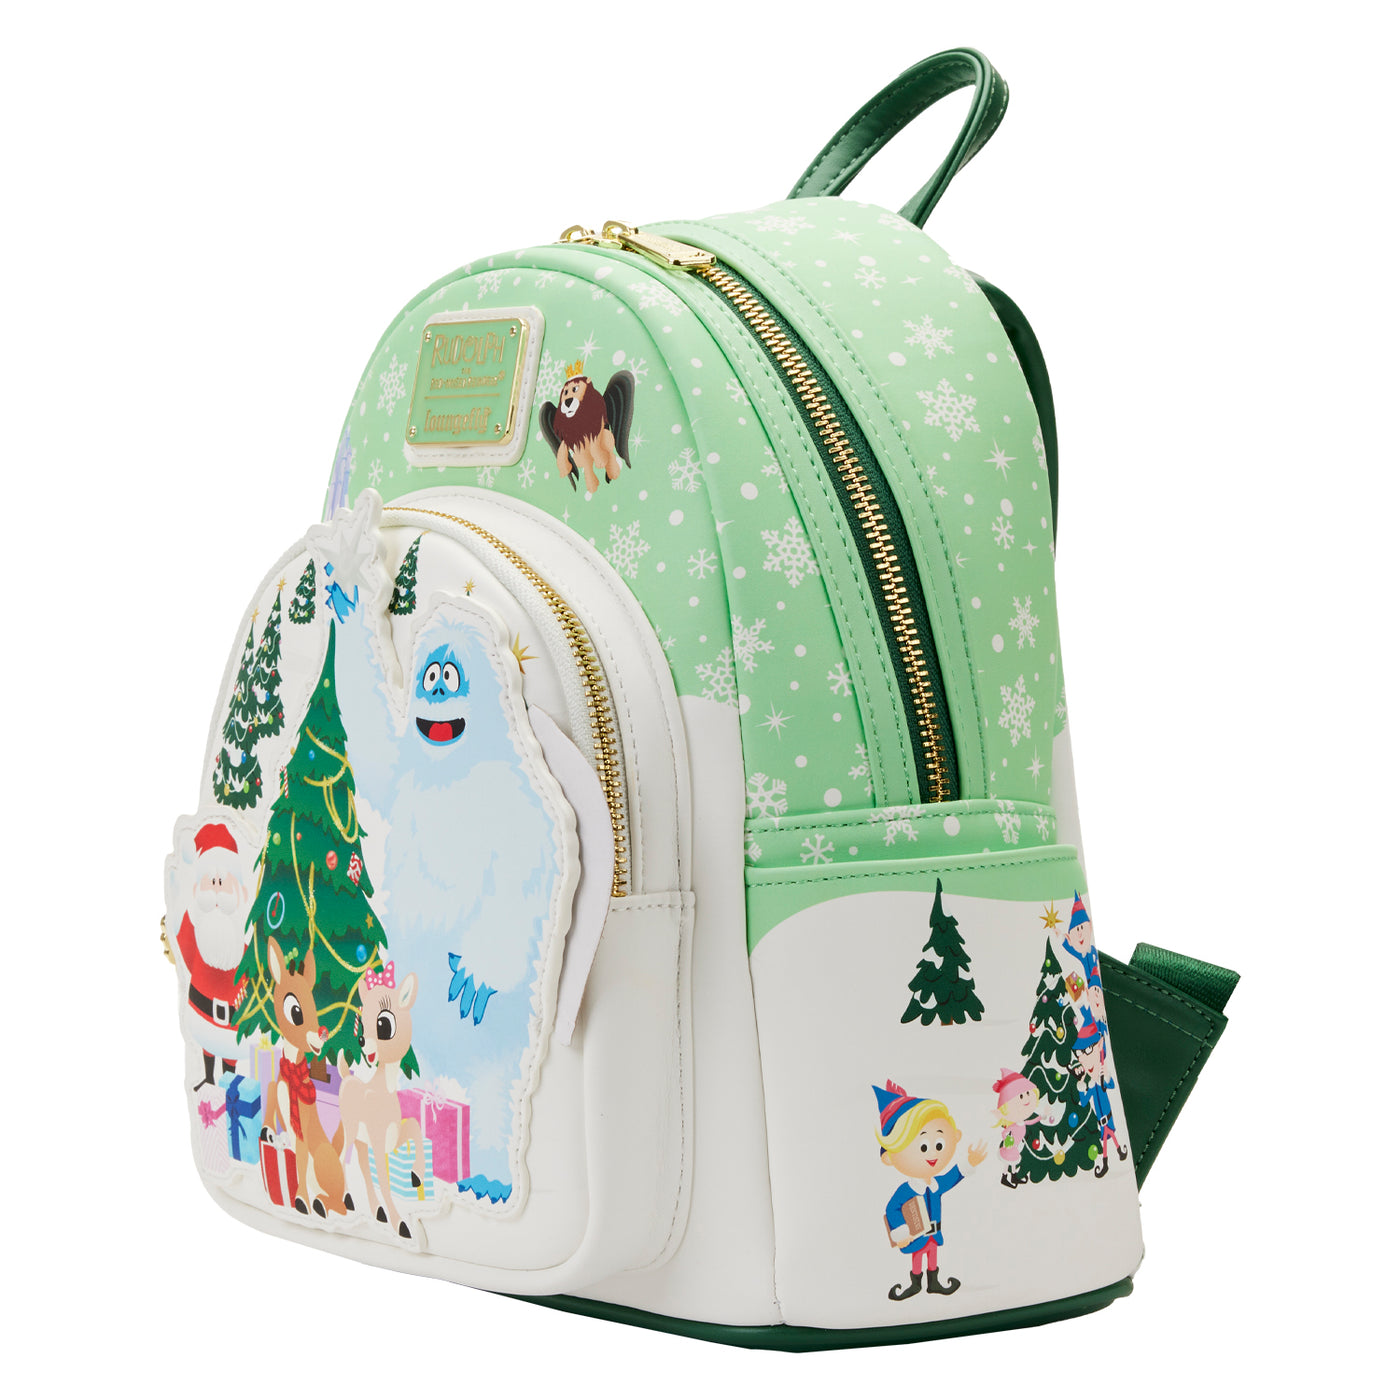 Rudolph The Red-Nose Reindeer Holiday Group Mini Backpack